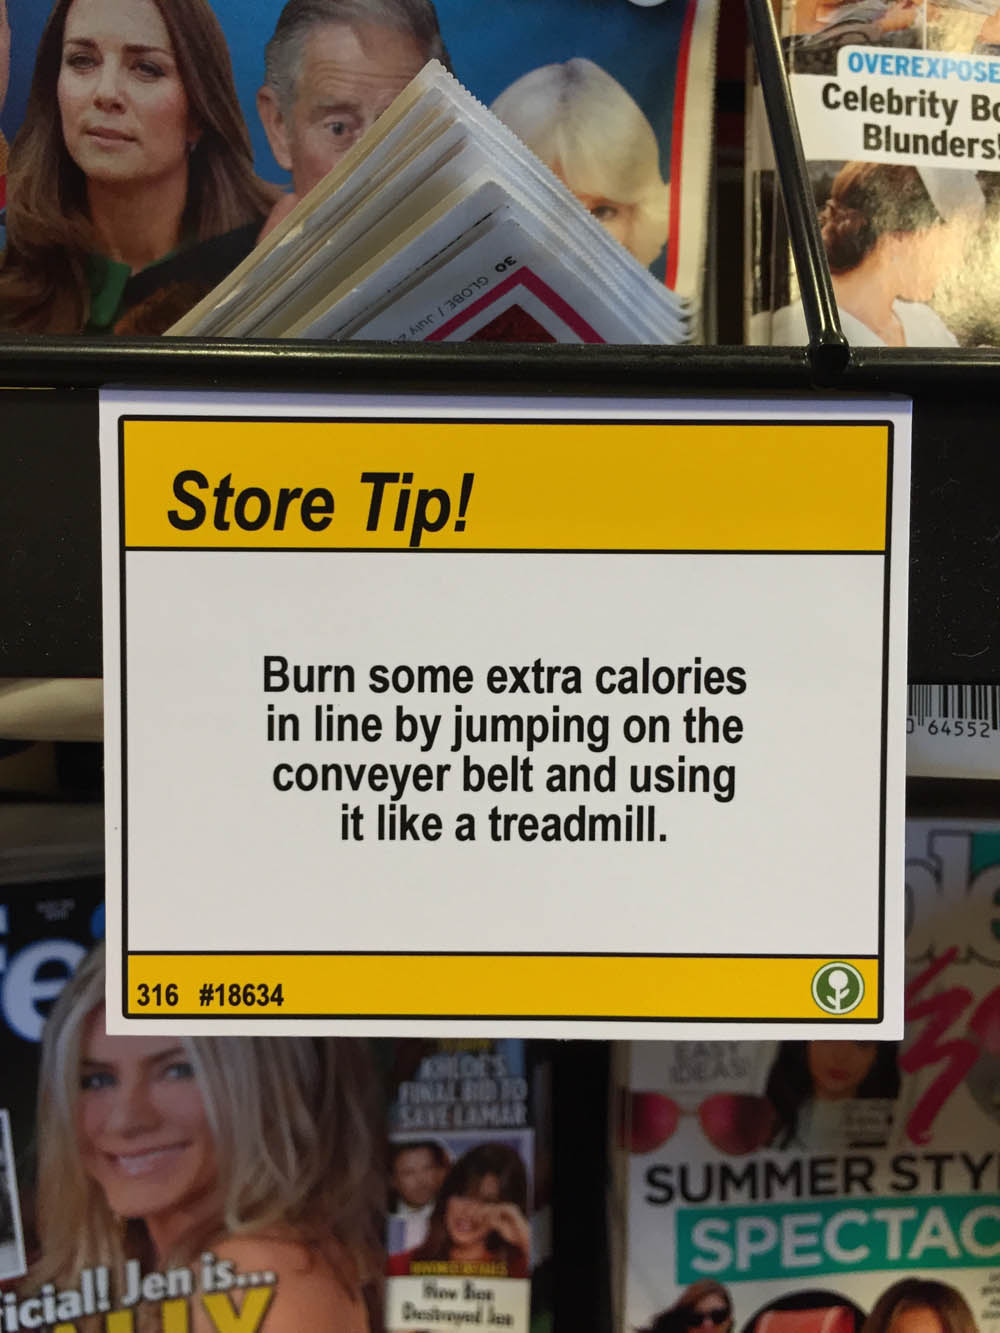 funny shopping tips - Overexpose Celebrity Bc Blunders Aine 1 78079 Os Store Tip! "64552 Burn some extra calories in line by jumping on the conveyer belt and using it a treadmill. 316 Summer Sty Spectac icial! Jen som